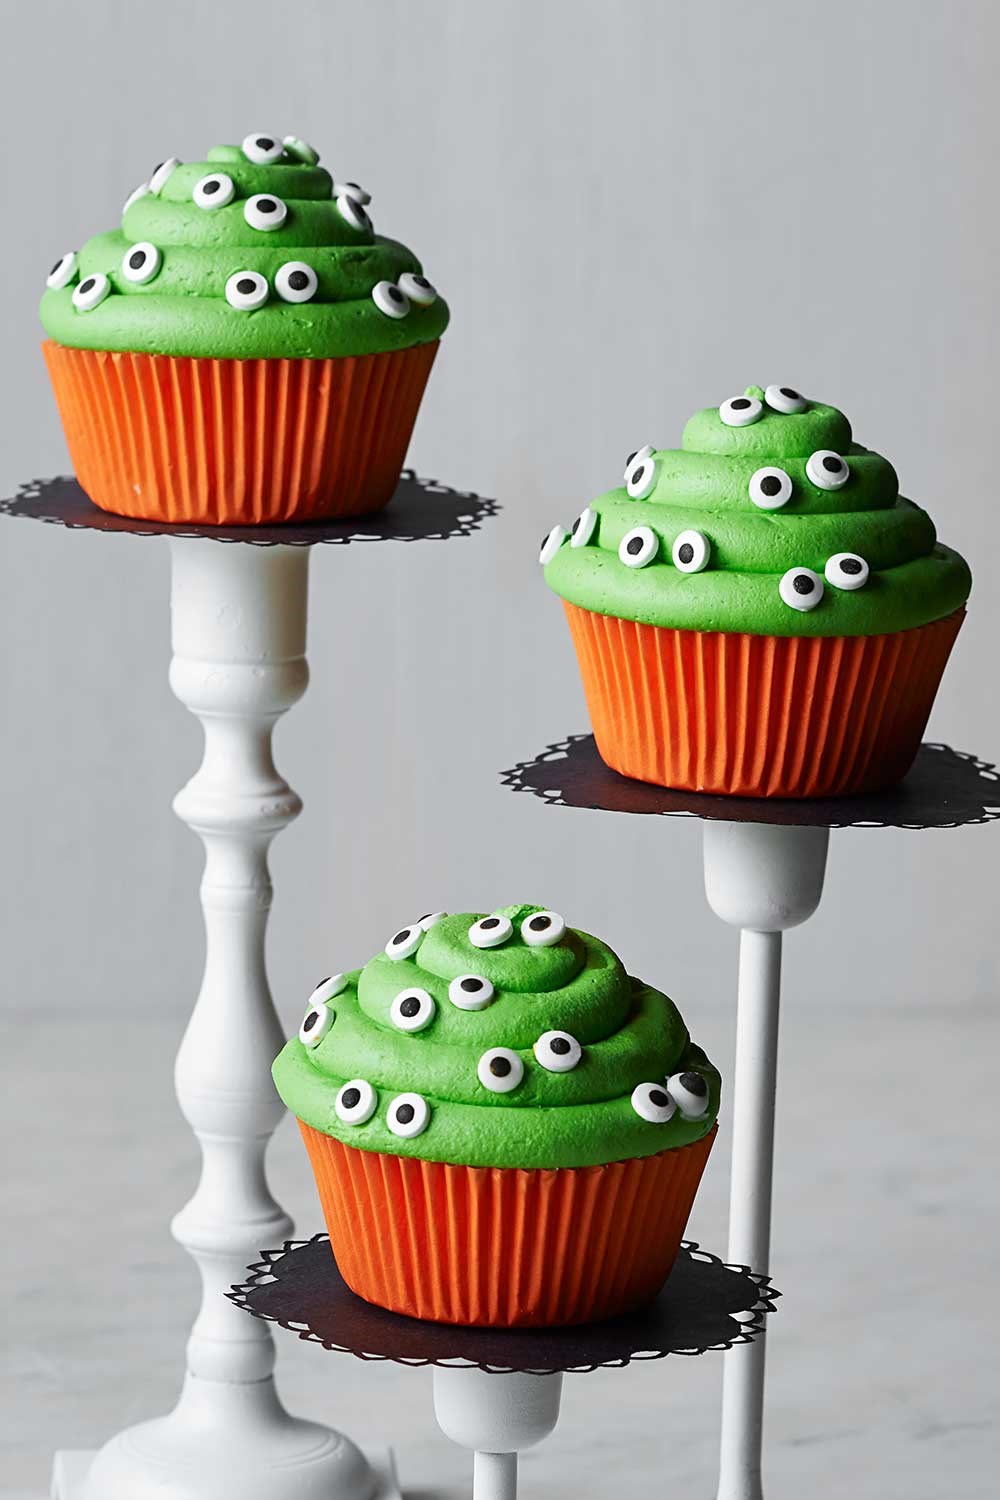 7 spooky Halloween cupcake ideas | Better Homes and Gardens